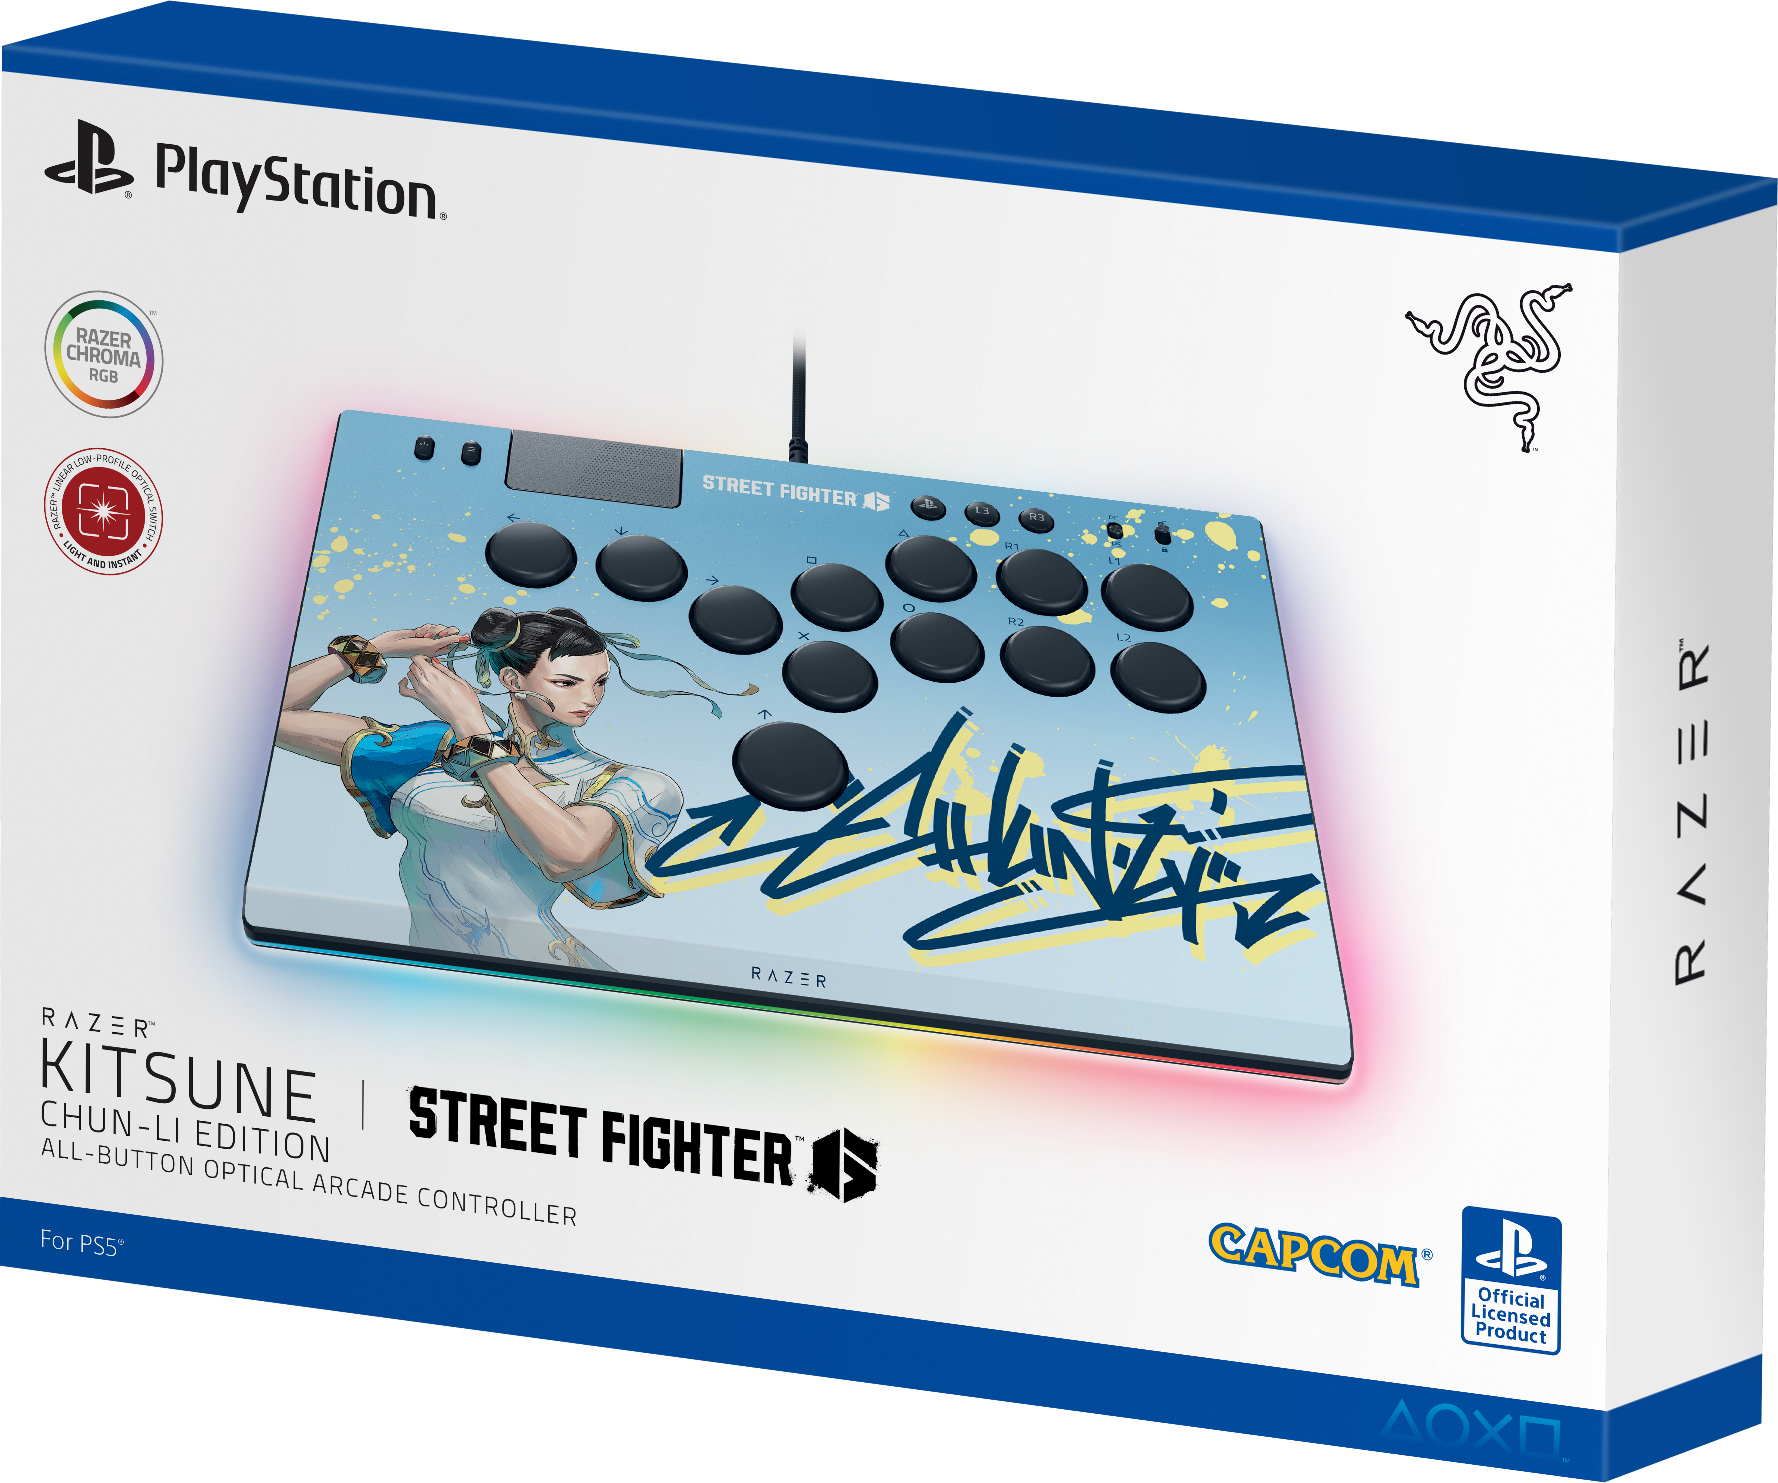 Mark Julio 『マークマン』 on X: The new @Razer Kitsune for PS5 looks so sleek! I  want this SF6 Chun-Li edition! The Kitsune uses low profile optical  switches and size/thickness is comparable to